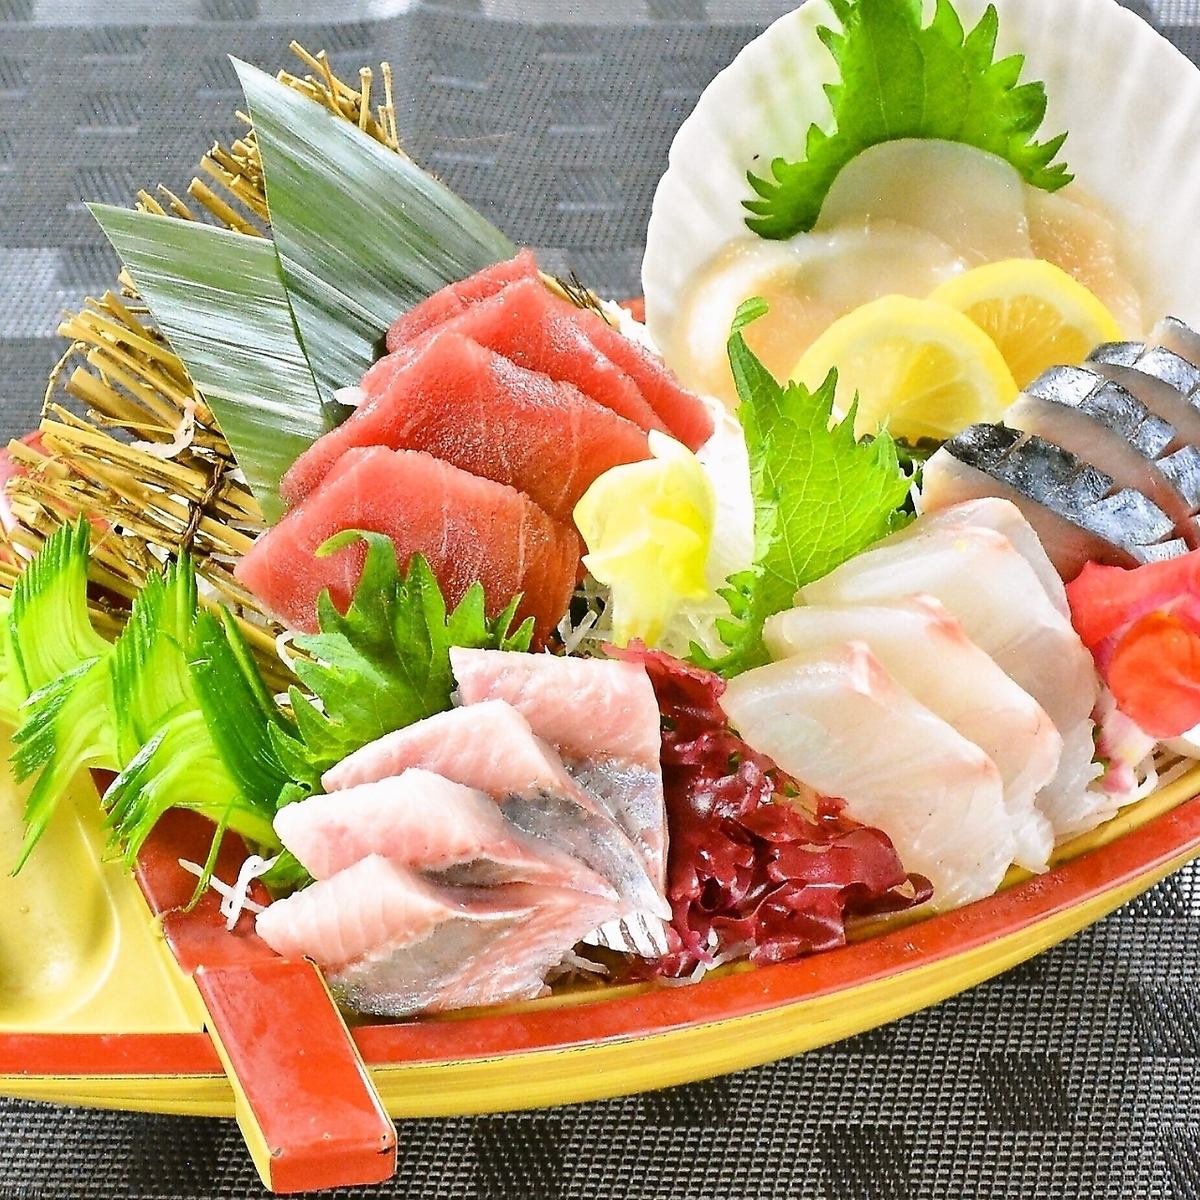 You can also use it as a main meal such as fresh sashimi, sushi, and chicken wings.